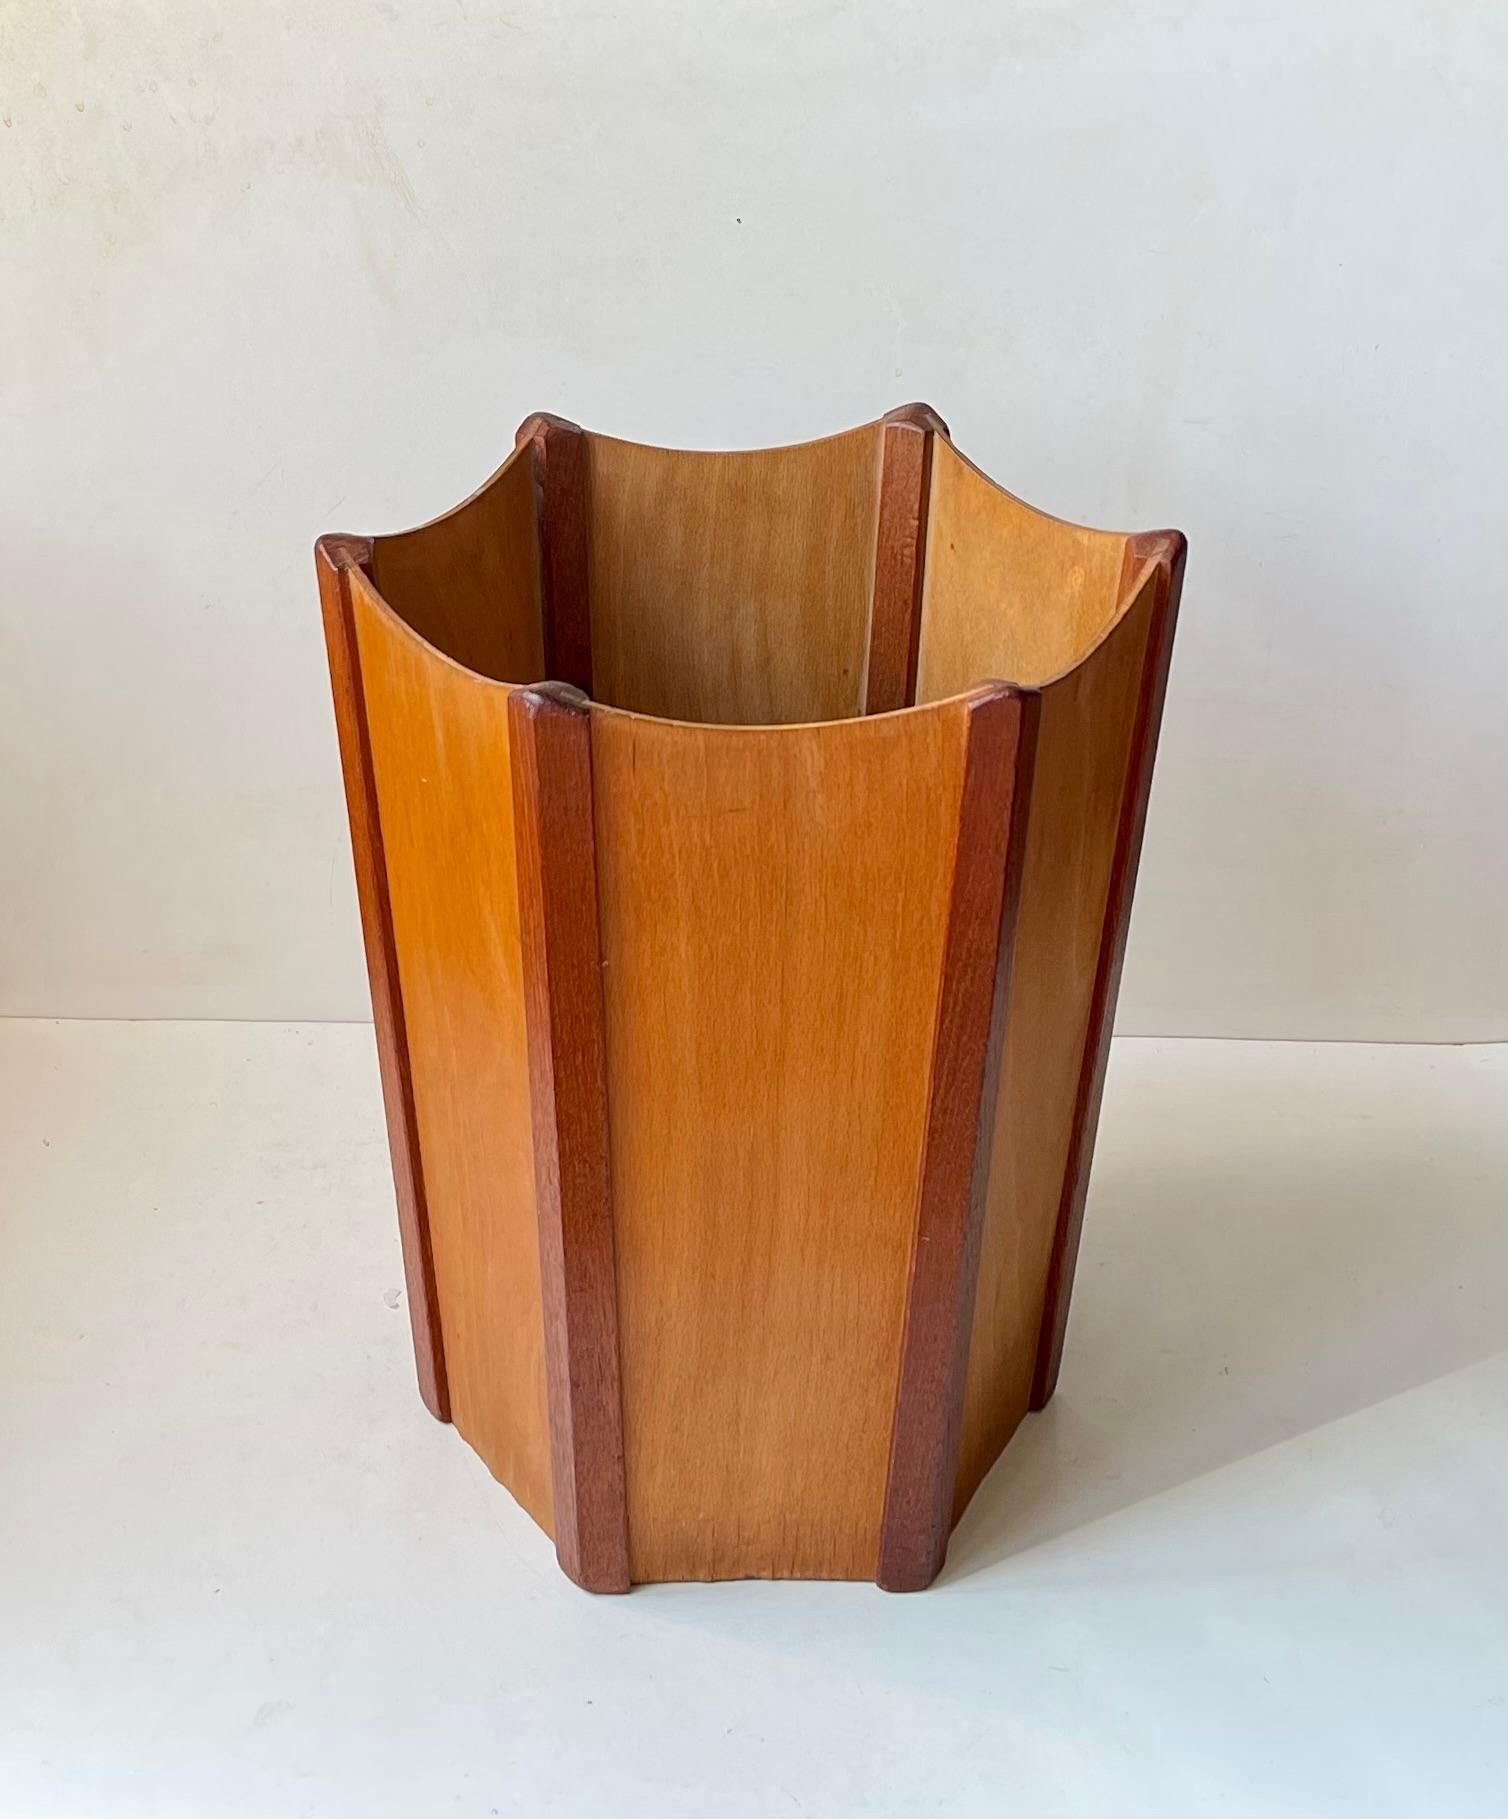 A wellmade hexagonal/crown shaped office waste basket in birch veneer and featuring solid teak frame. Unknown Scandinavian furniture maker circa 1970 in a style reminiscent of Servex - Marin Åberg. Measurements: H: 36 cm, W/D: 30/28 cm. Please read